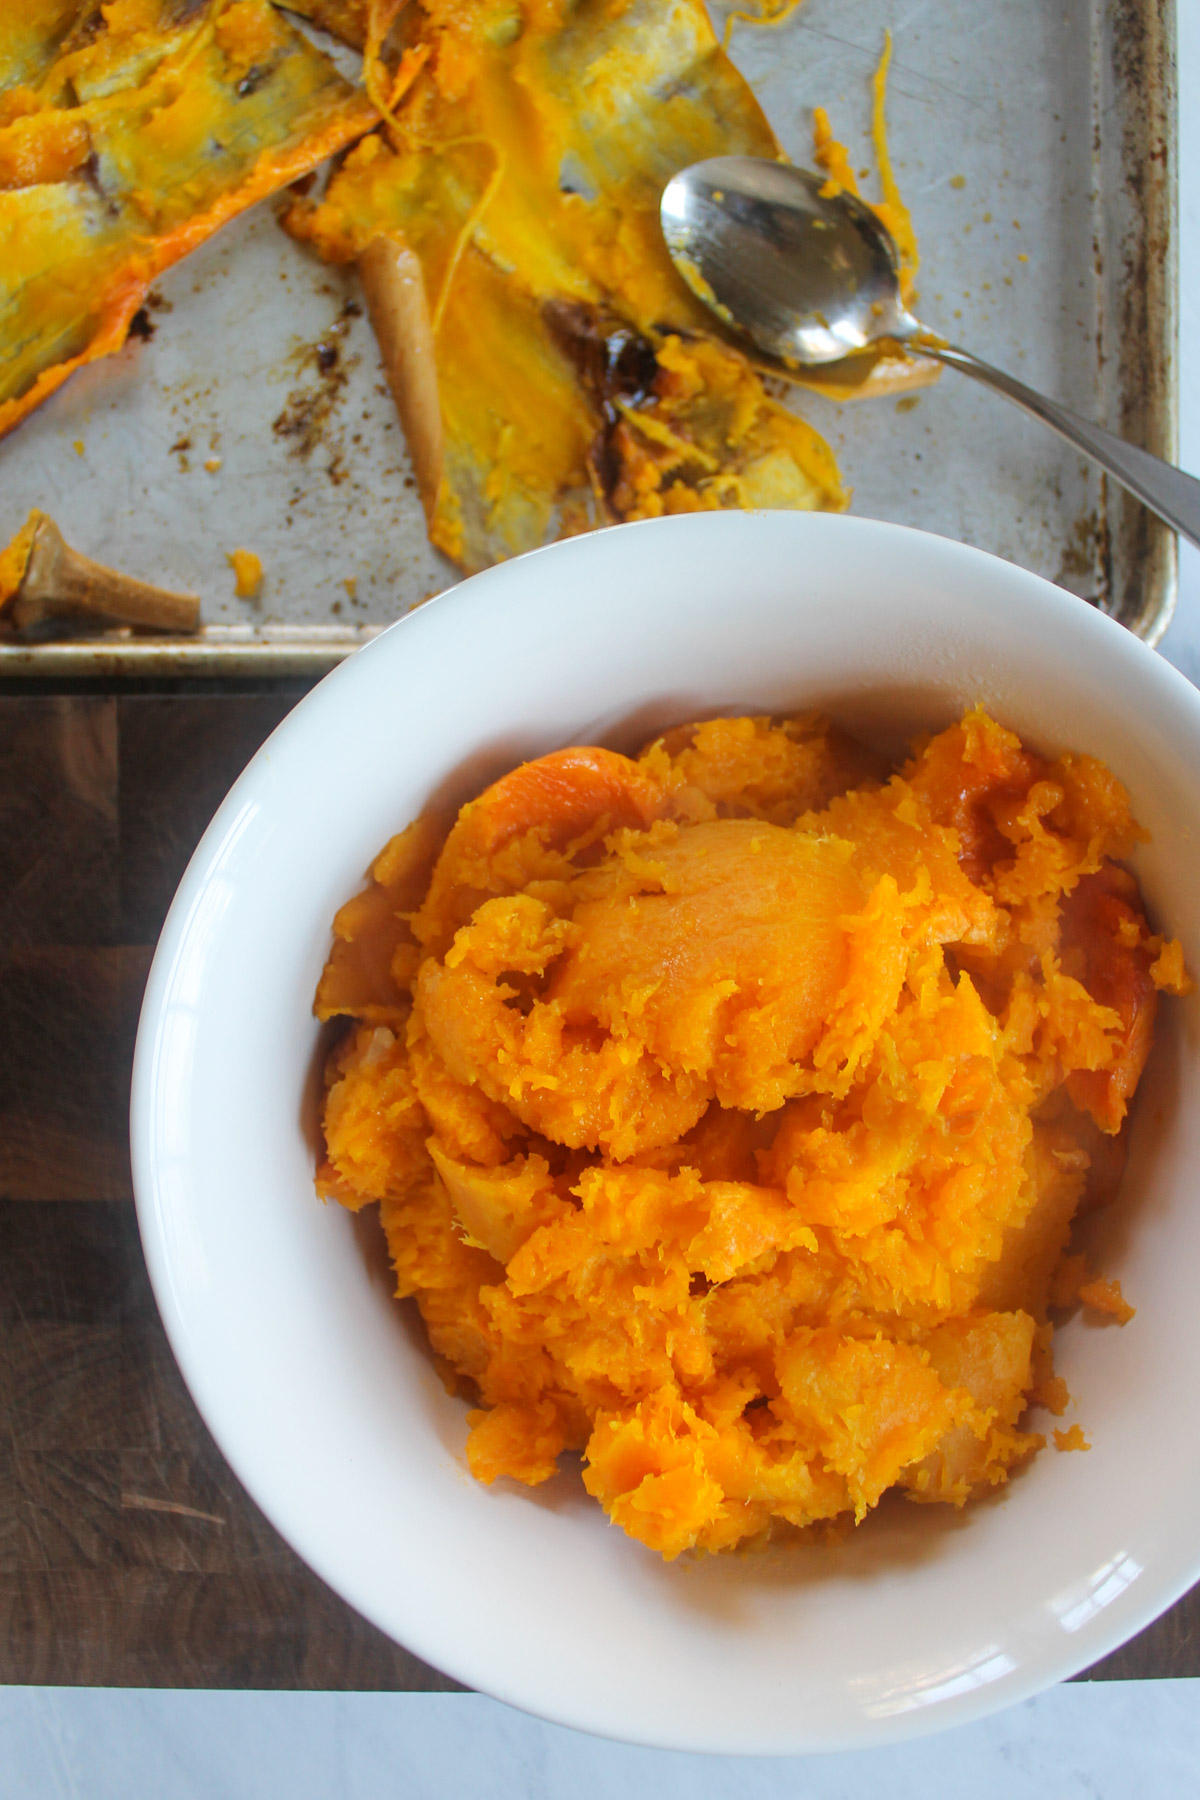 A bowl of butternut squash scooped from the roasted peels.